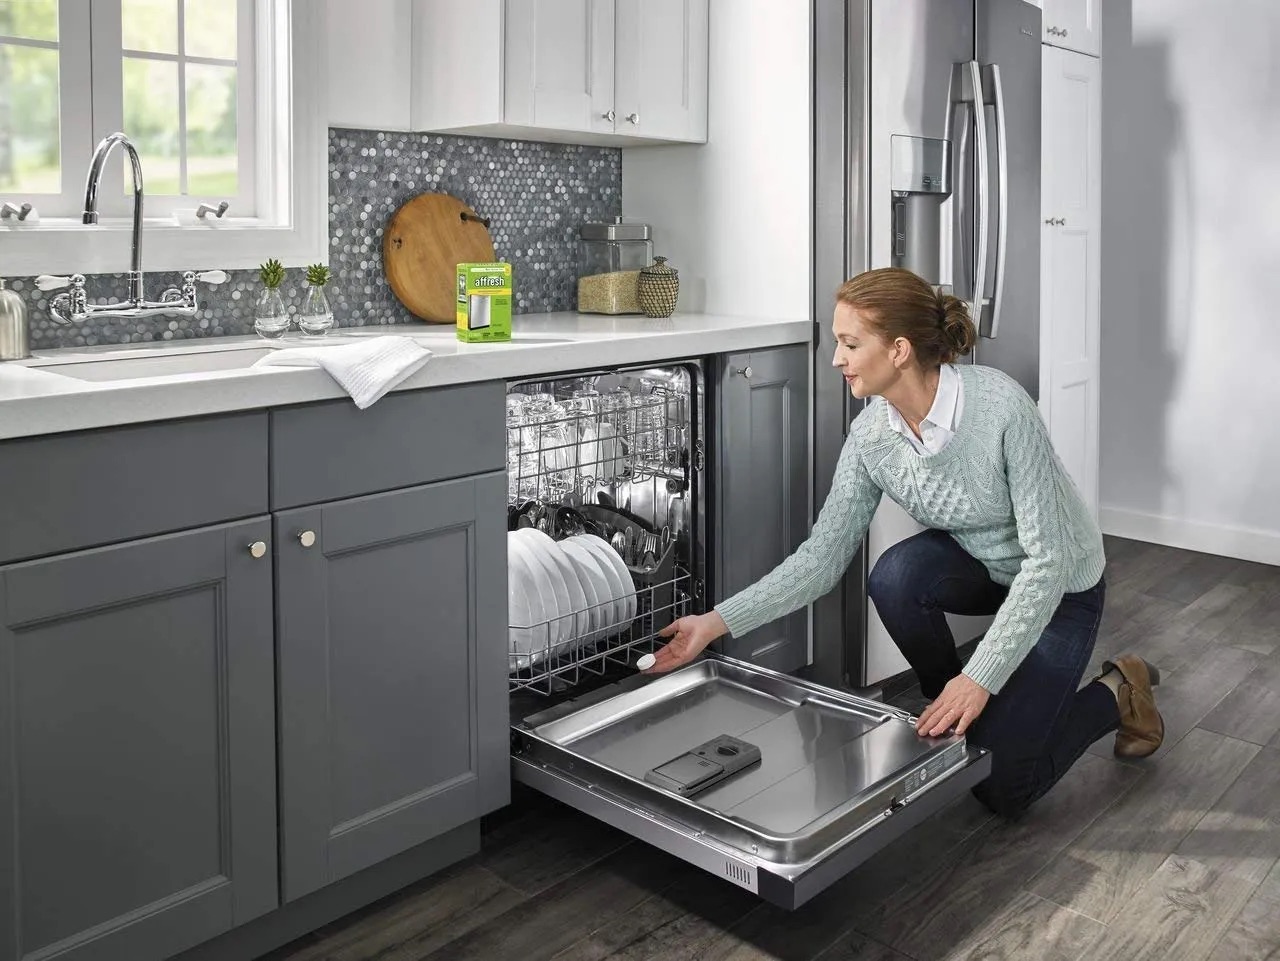 How To Fix The Error Code F6 For Maytag Dishwasher